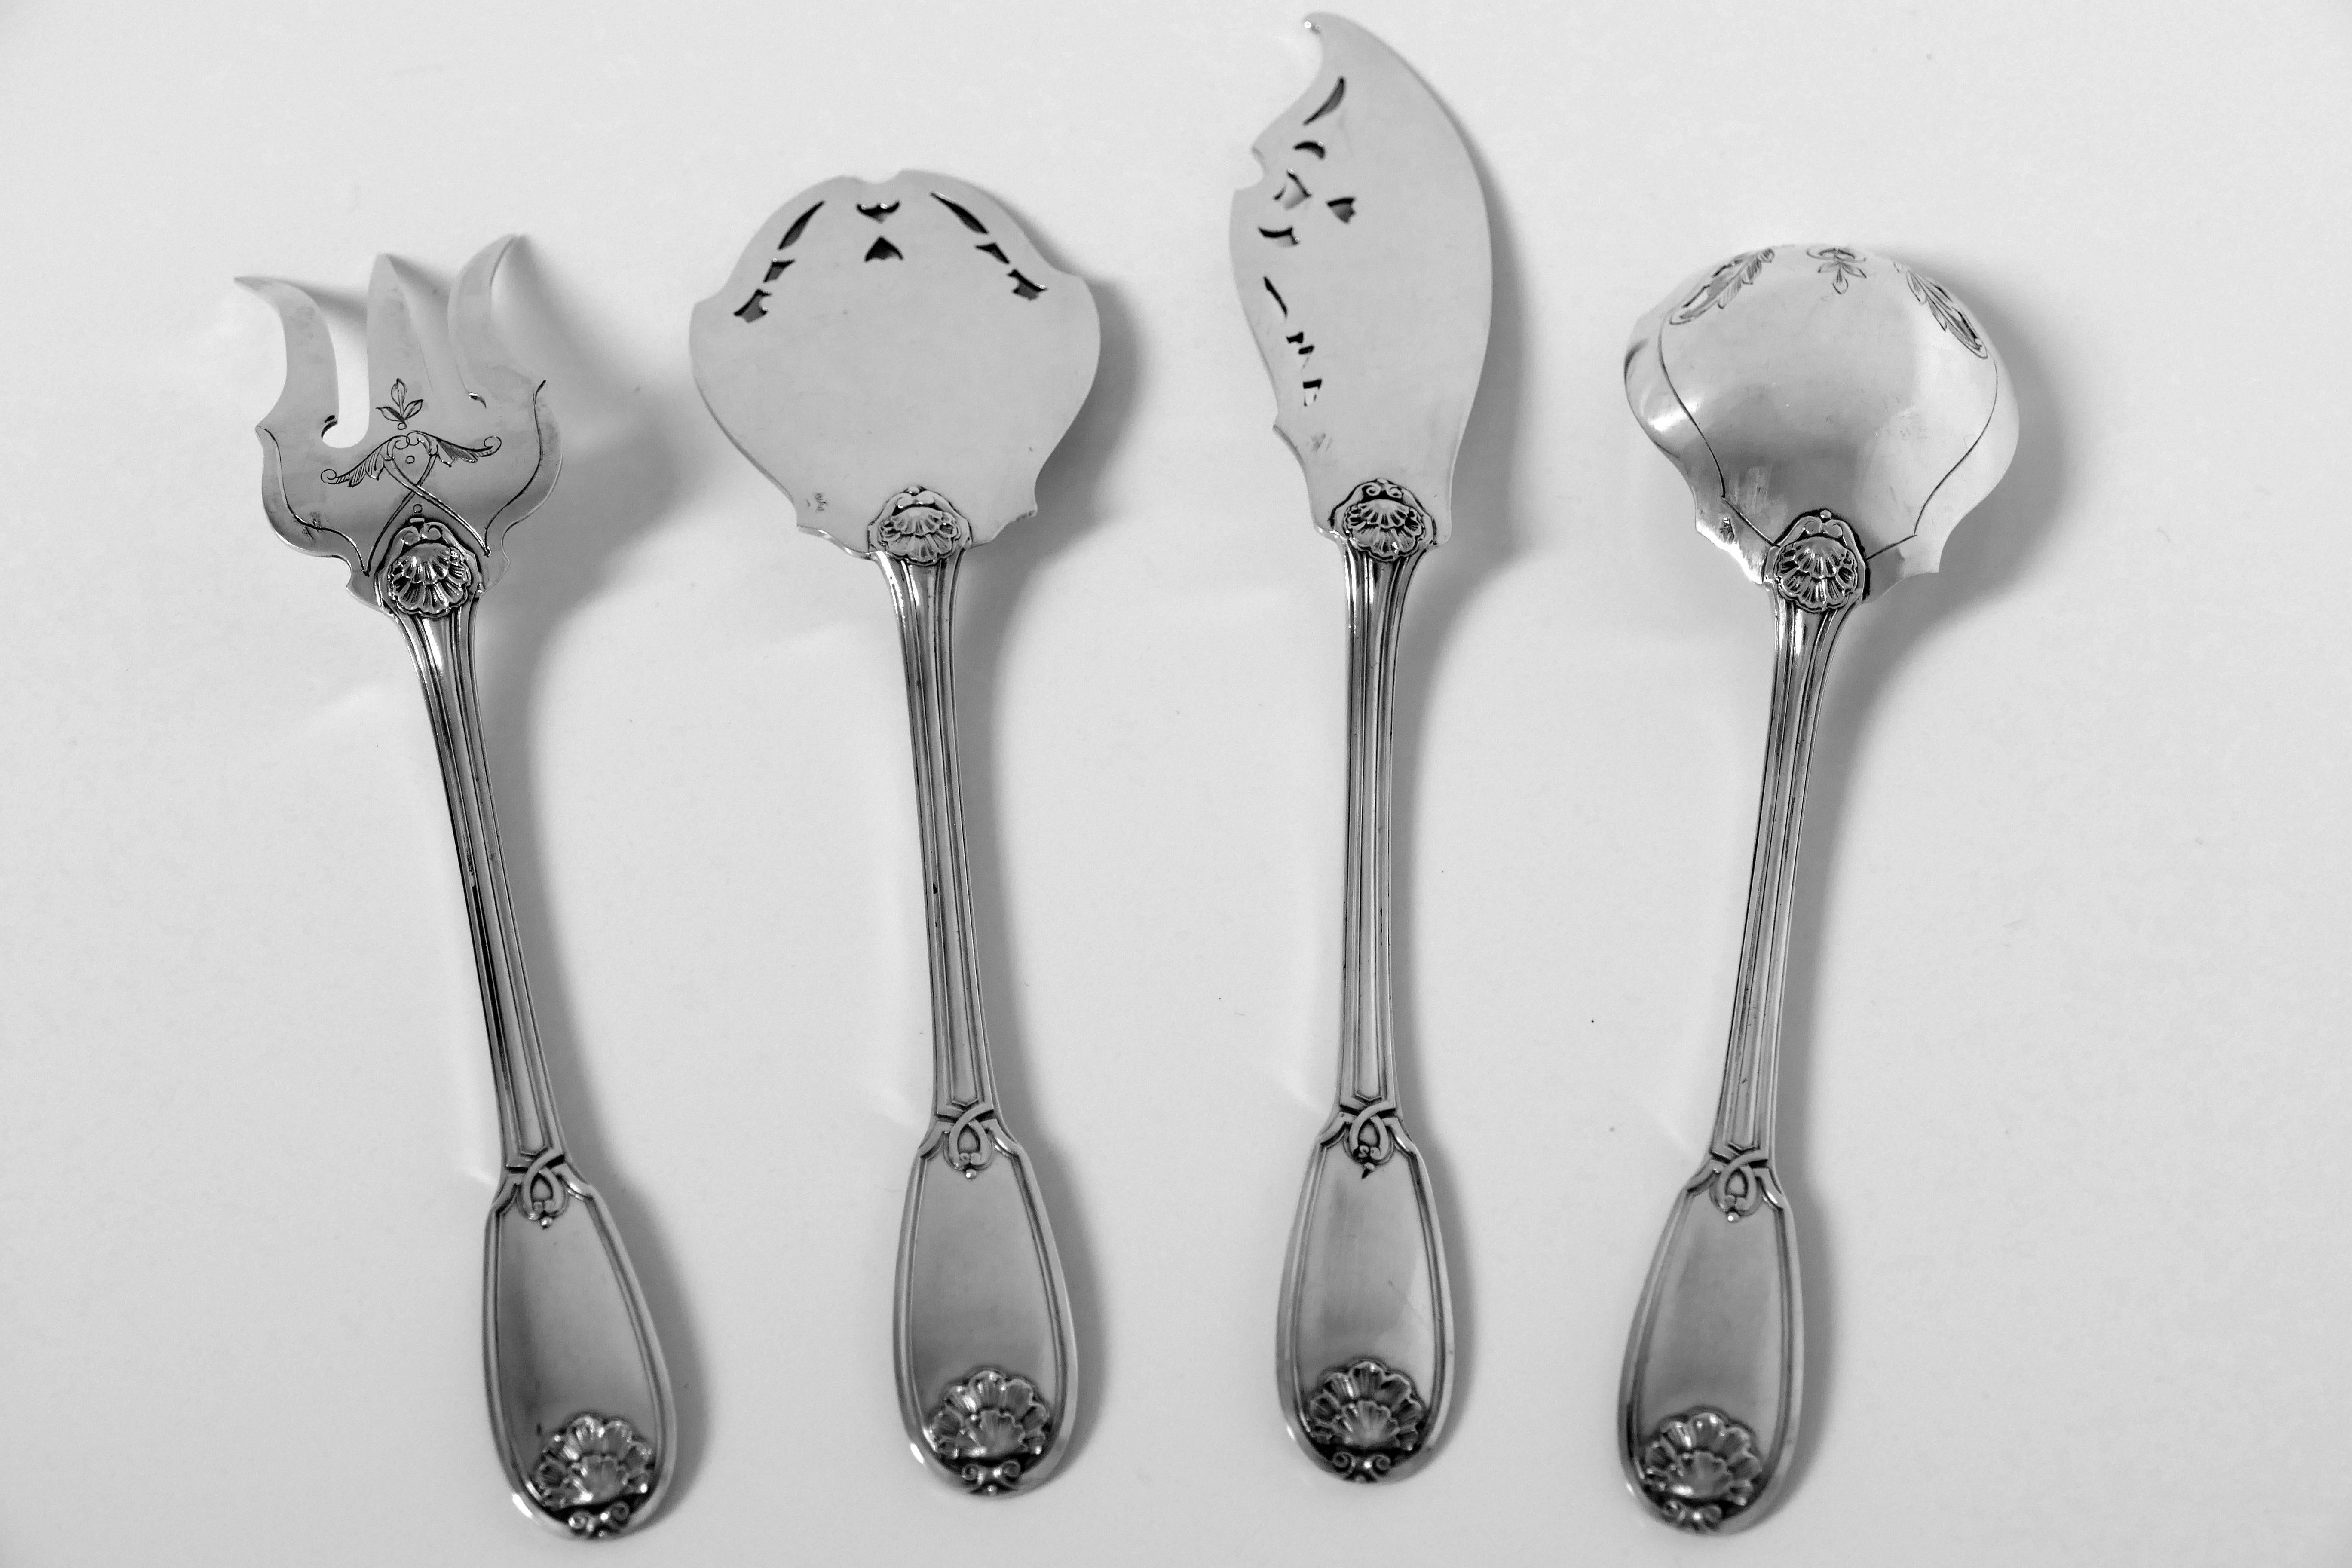 Ricard French All Sterling Silver Dessert Hors D'oeuvre Set 4 Pc, Box, Regency For Sale 1